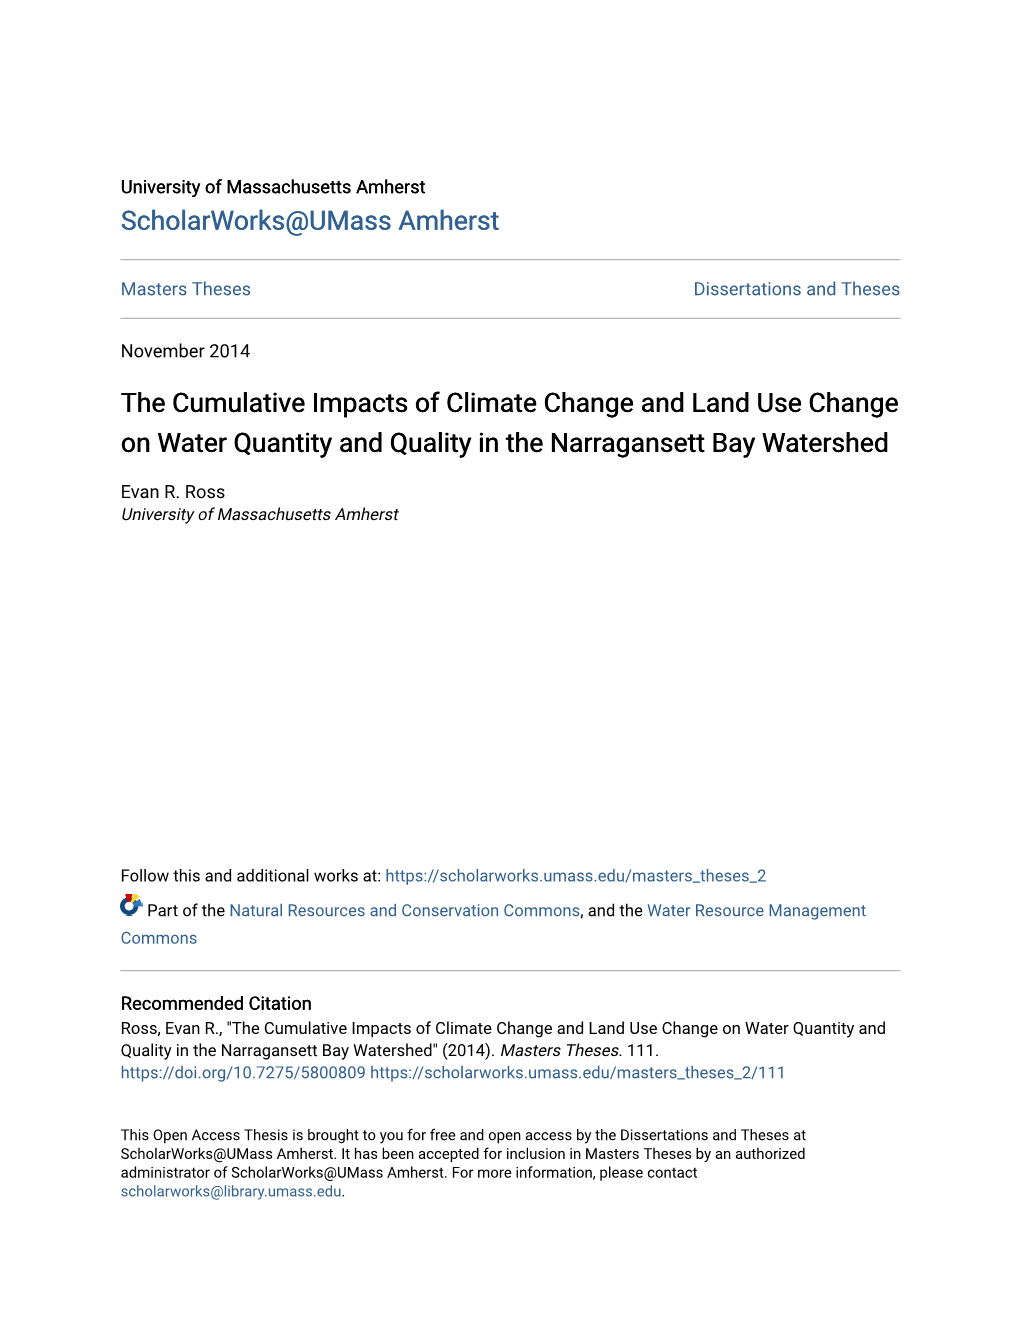 The Cumulative Impacts of Climate Change and Land Use Change on Water Quantity and Quality in the Narragansett Bay Watershed